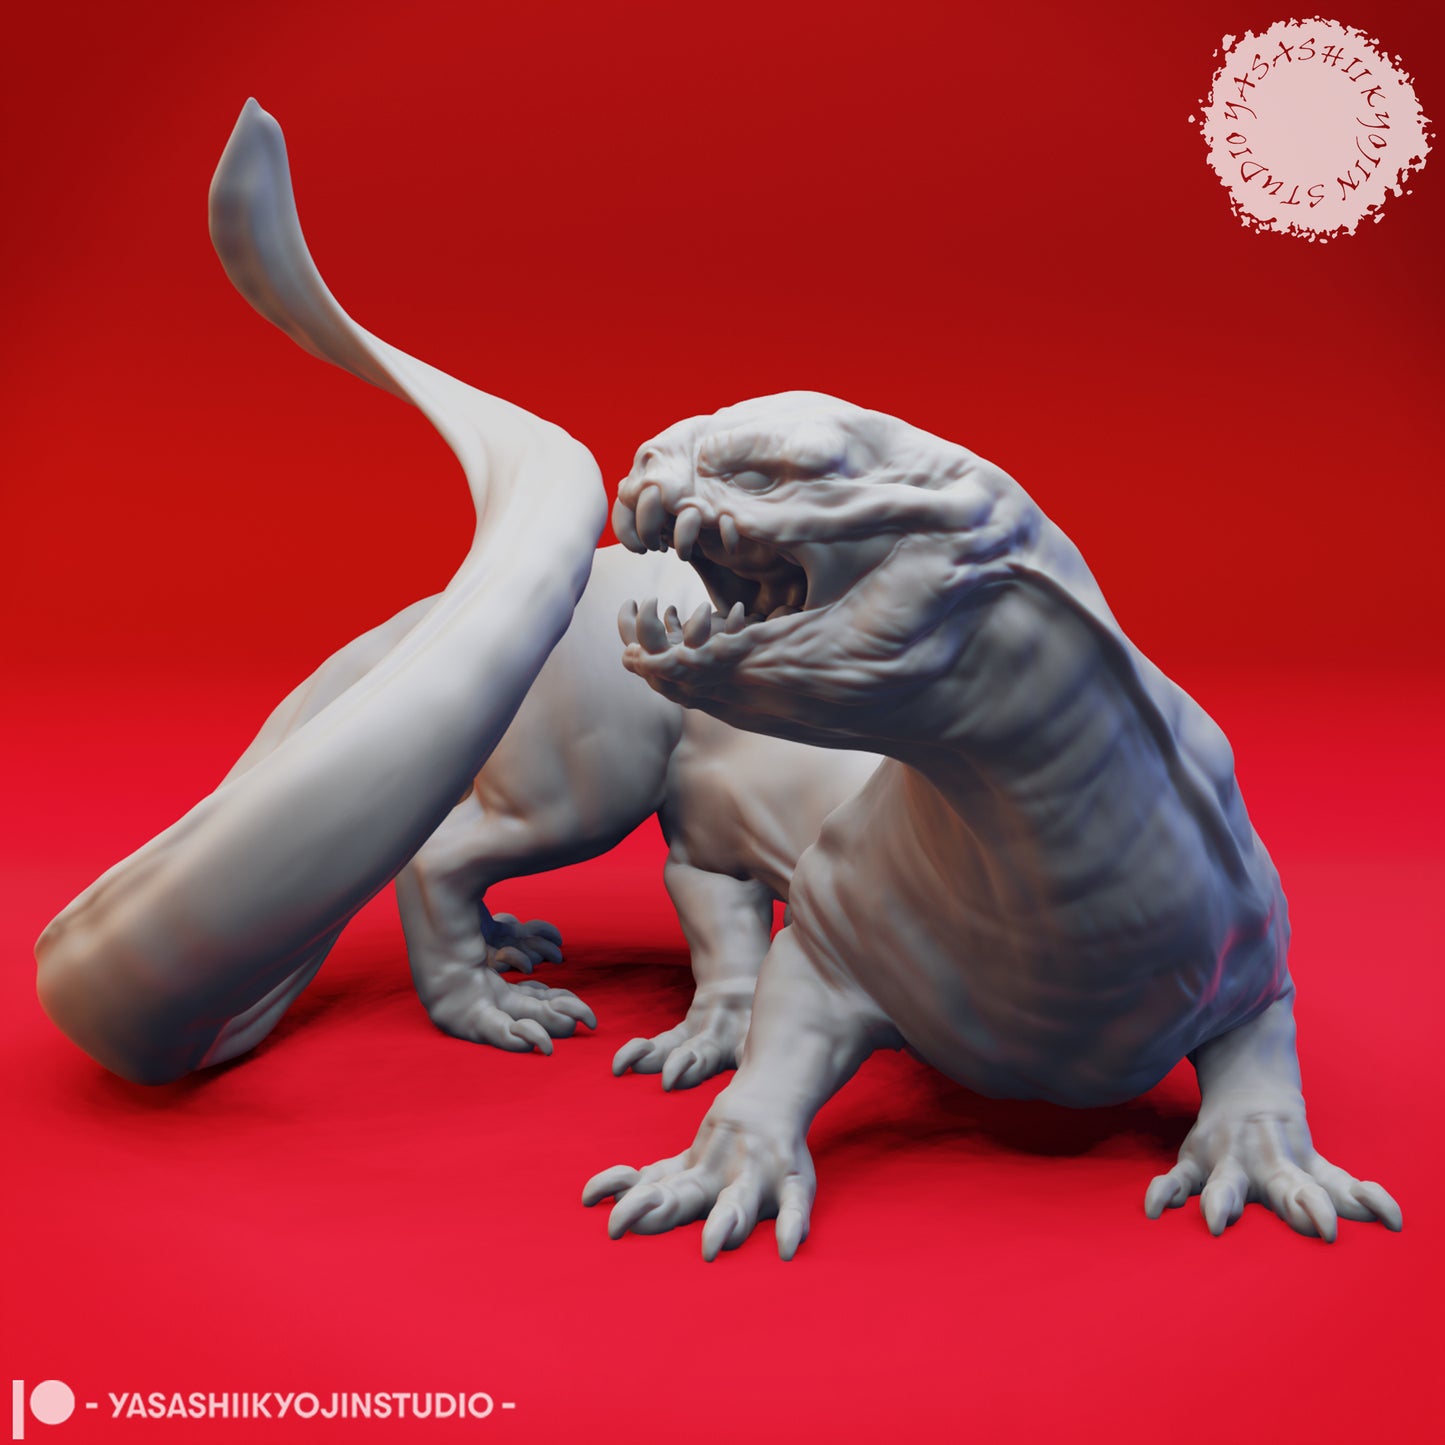 Frost Salamander - Tabletop Miniature (Pre-Supported STL)